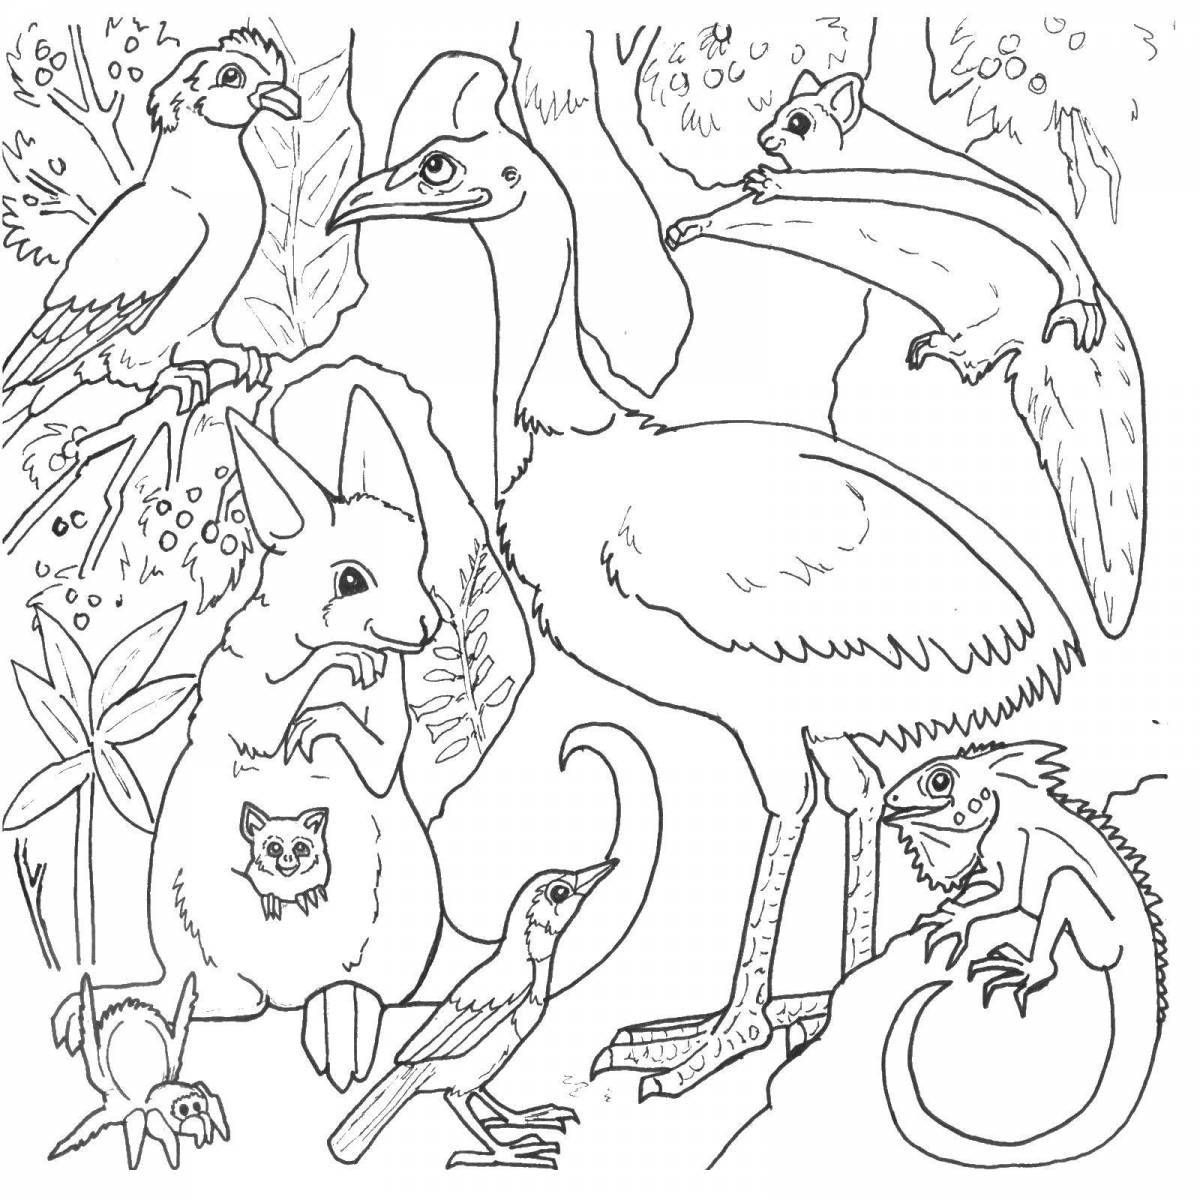 Humorous animal coloring pages